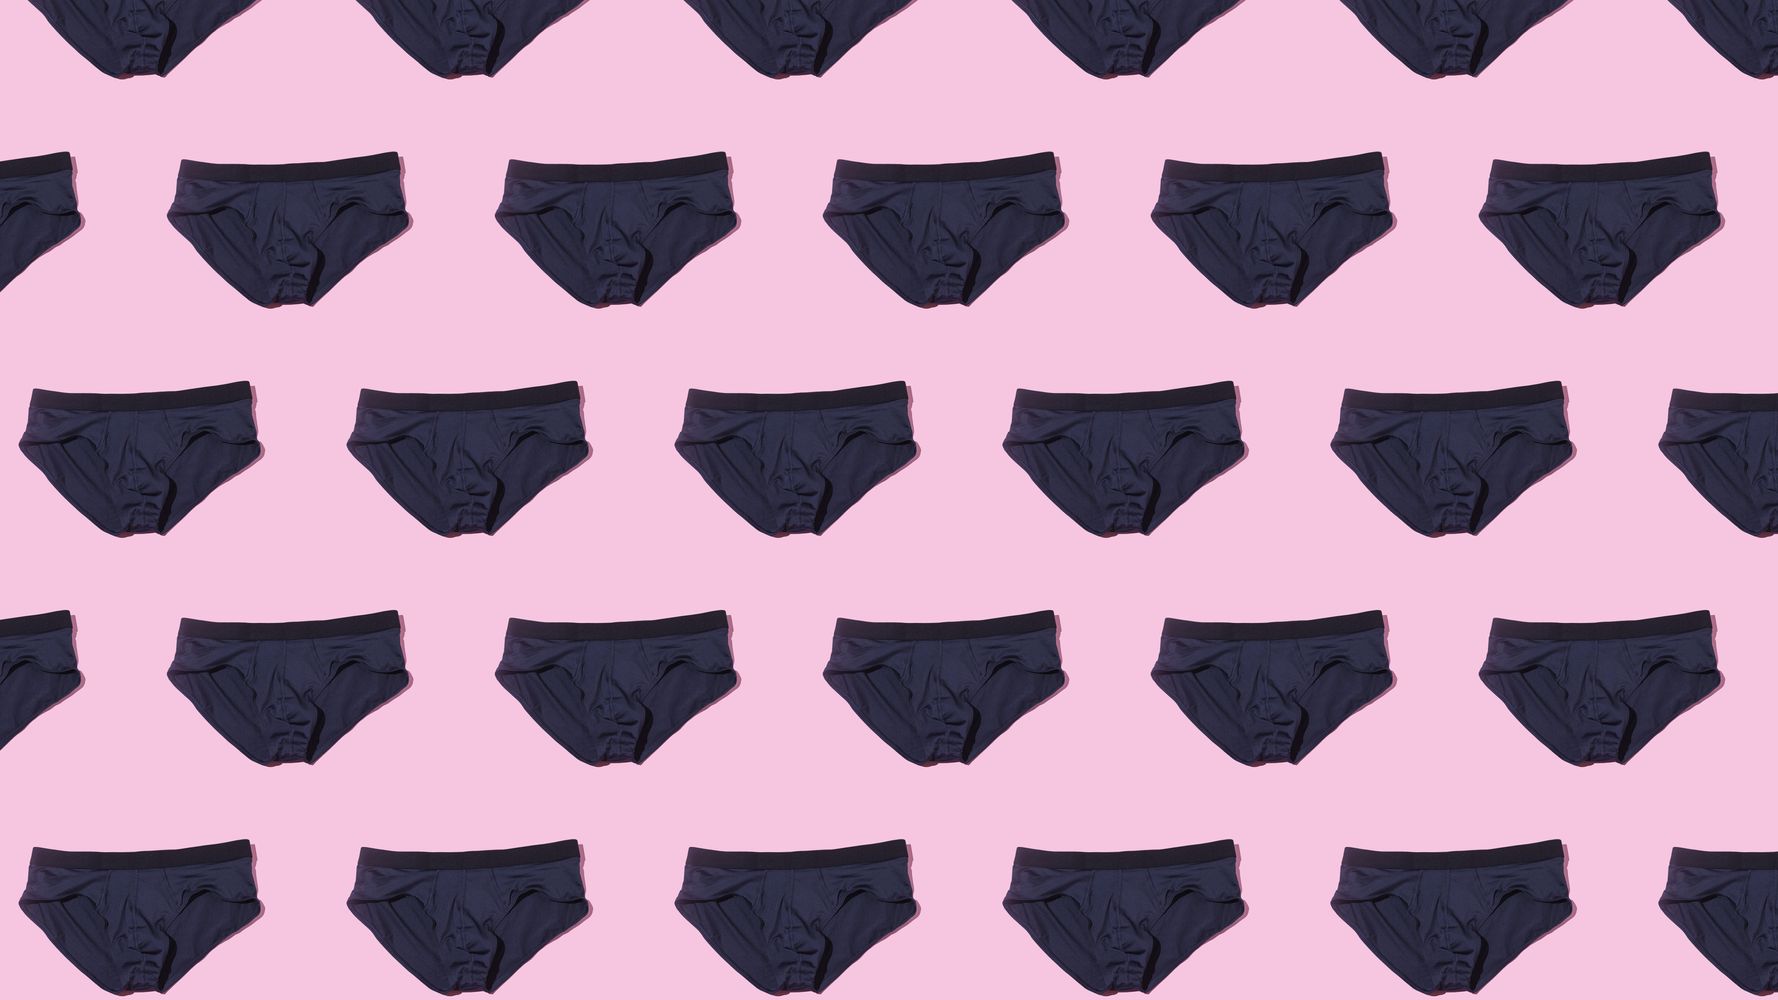 Here's How Much People Are Really Making Selling Used Underwear